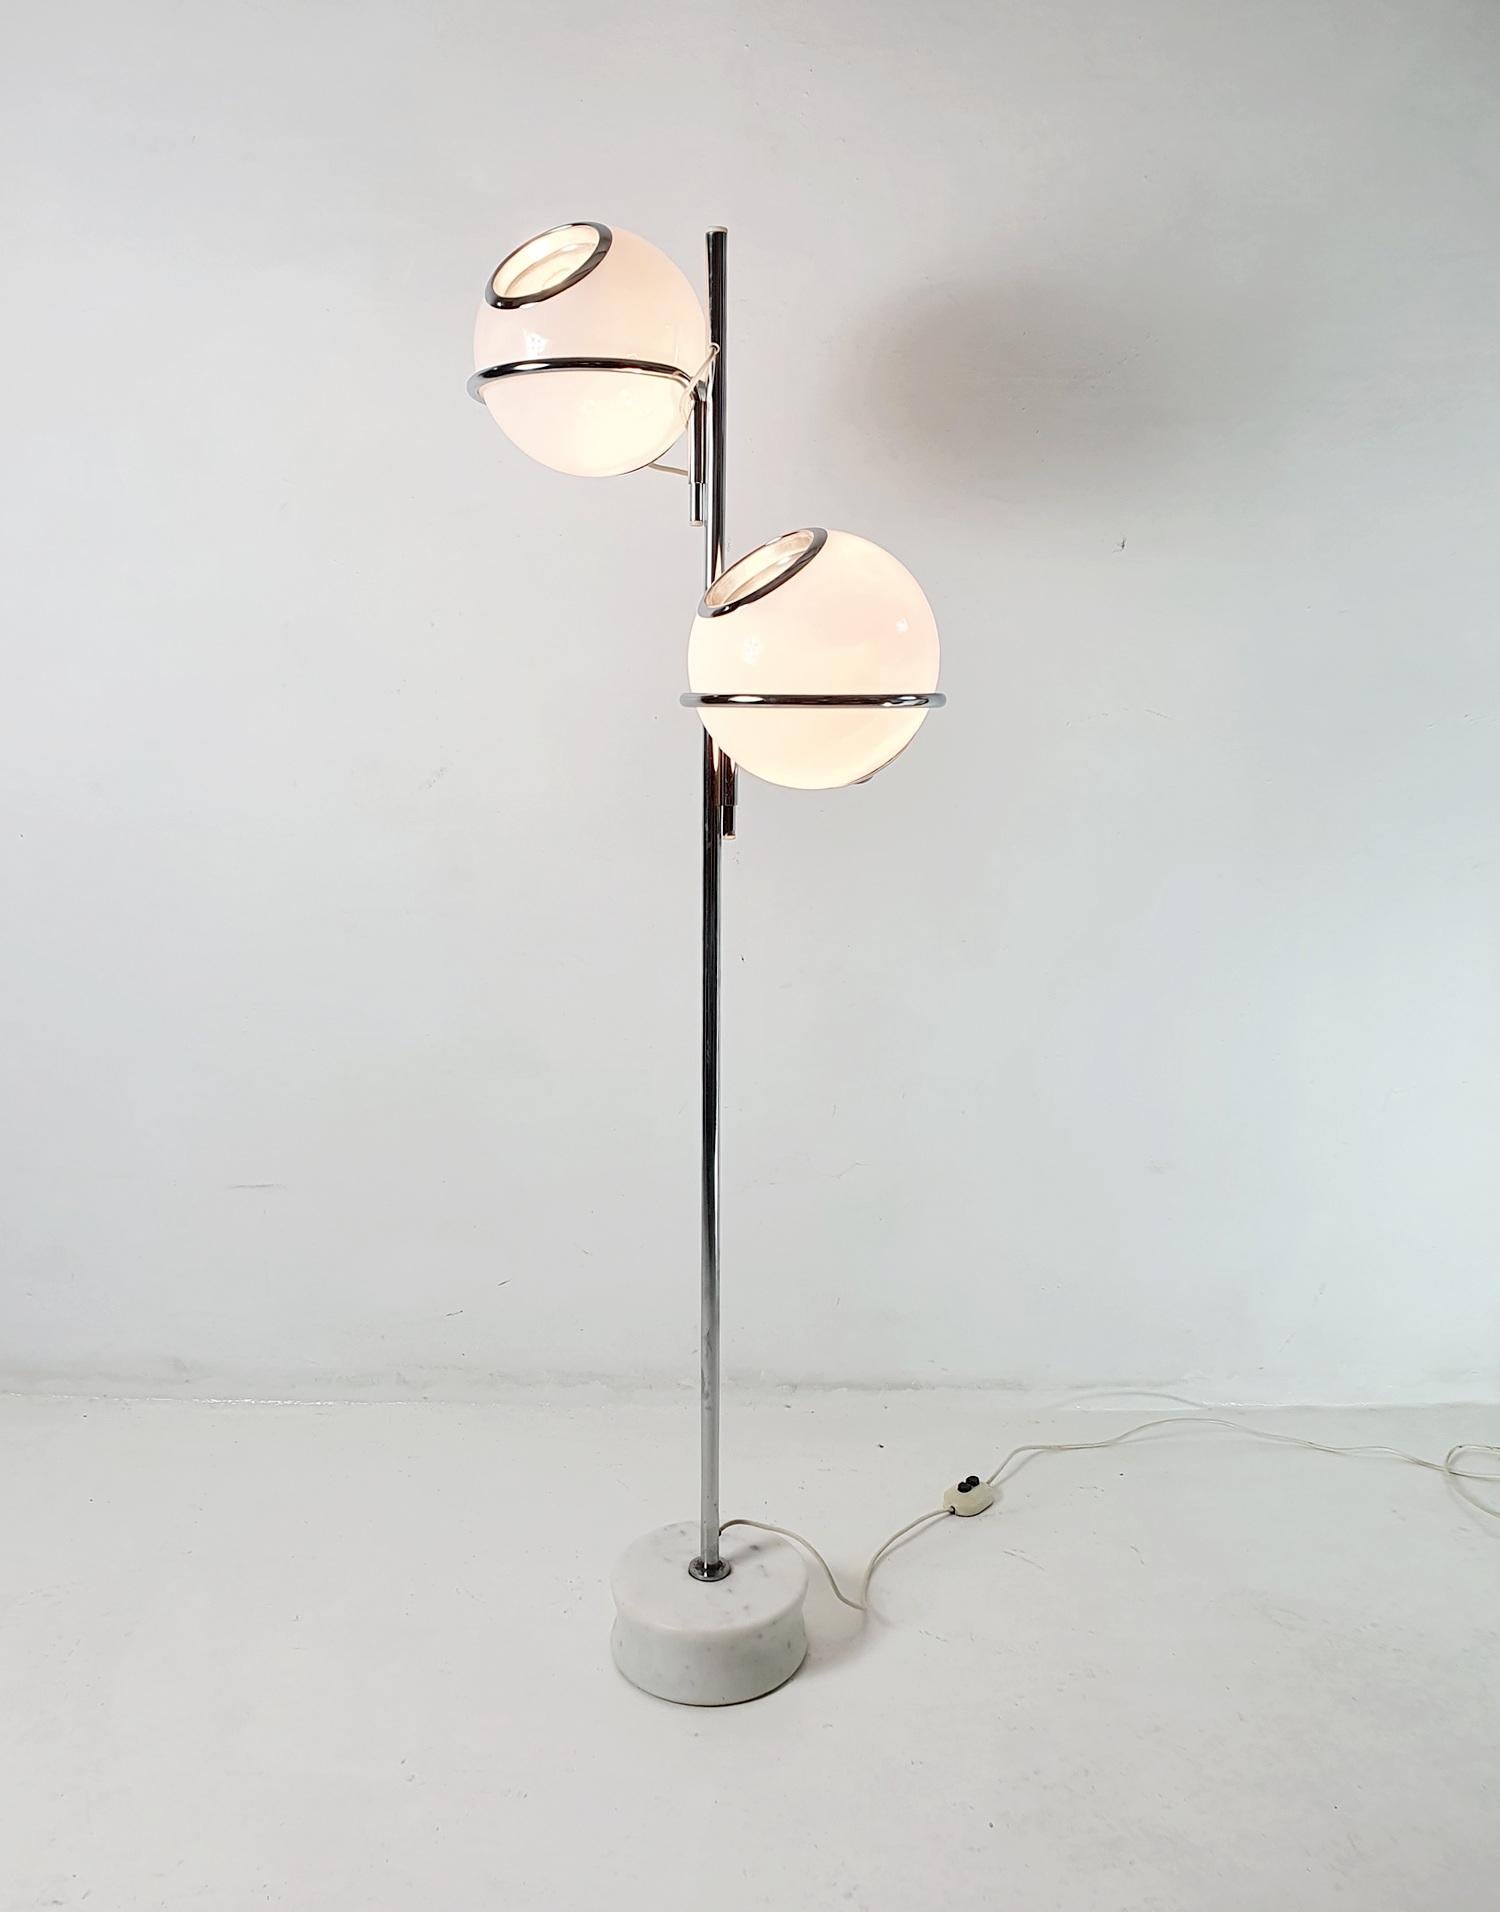 This is an original model 1094 floor lamp by Gino Sarfatti (1912-1985) which was designed for Arteluce in 1969.
It features a carrara marble base with a steel structure wich is chromed and independently adjustable milk glass lampshades.
In very nice